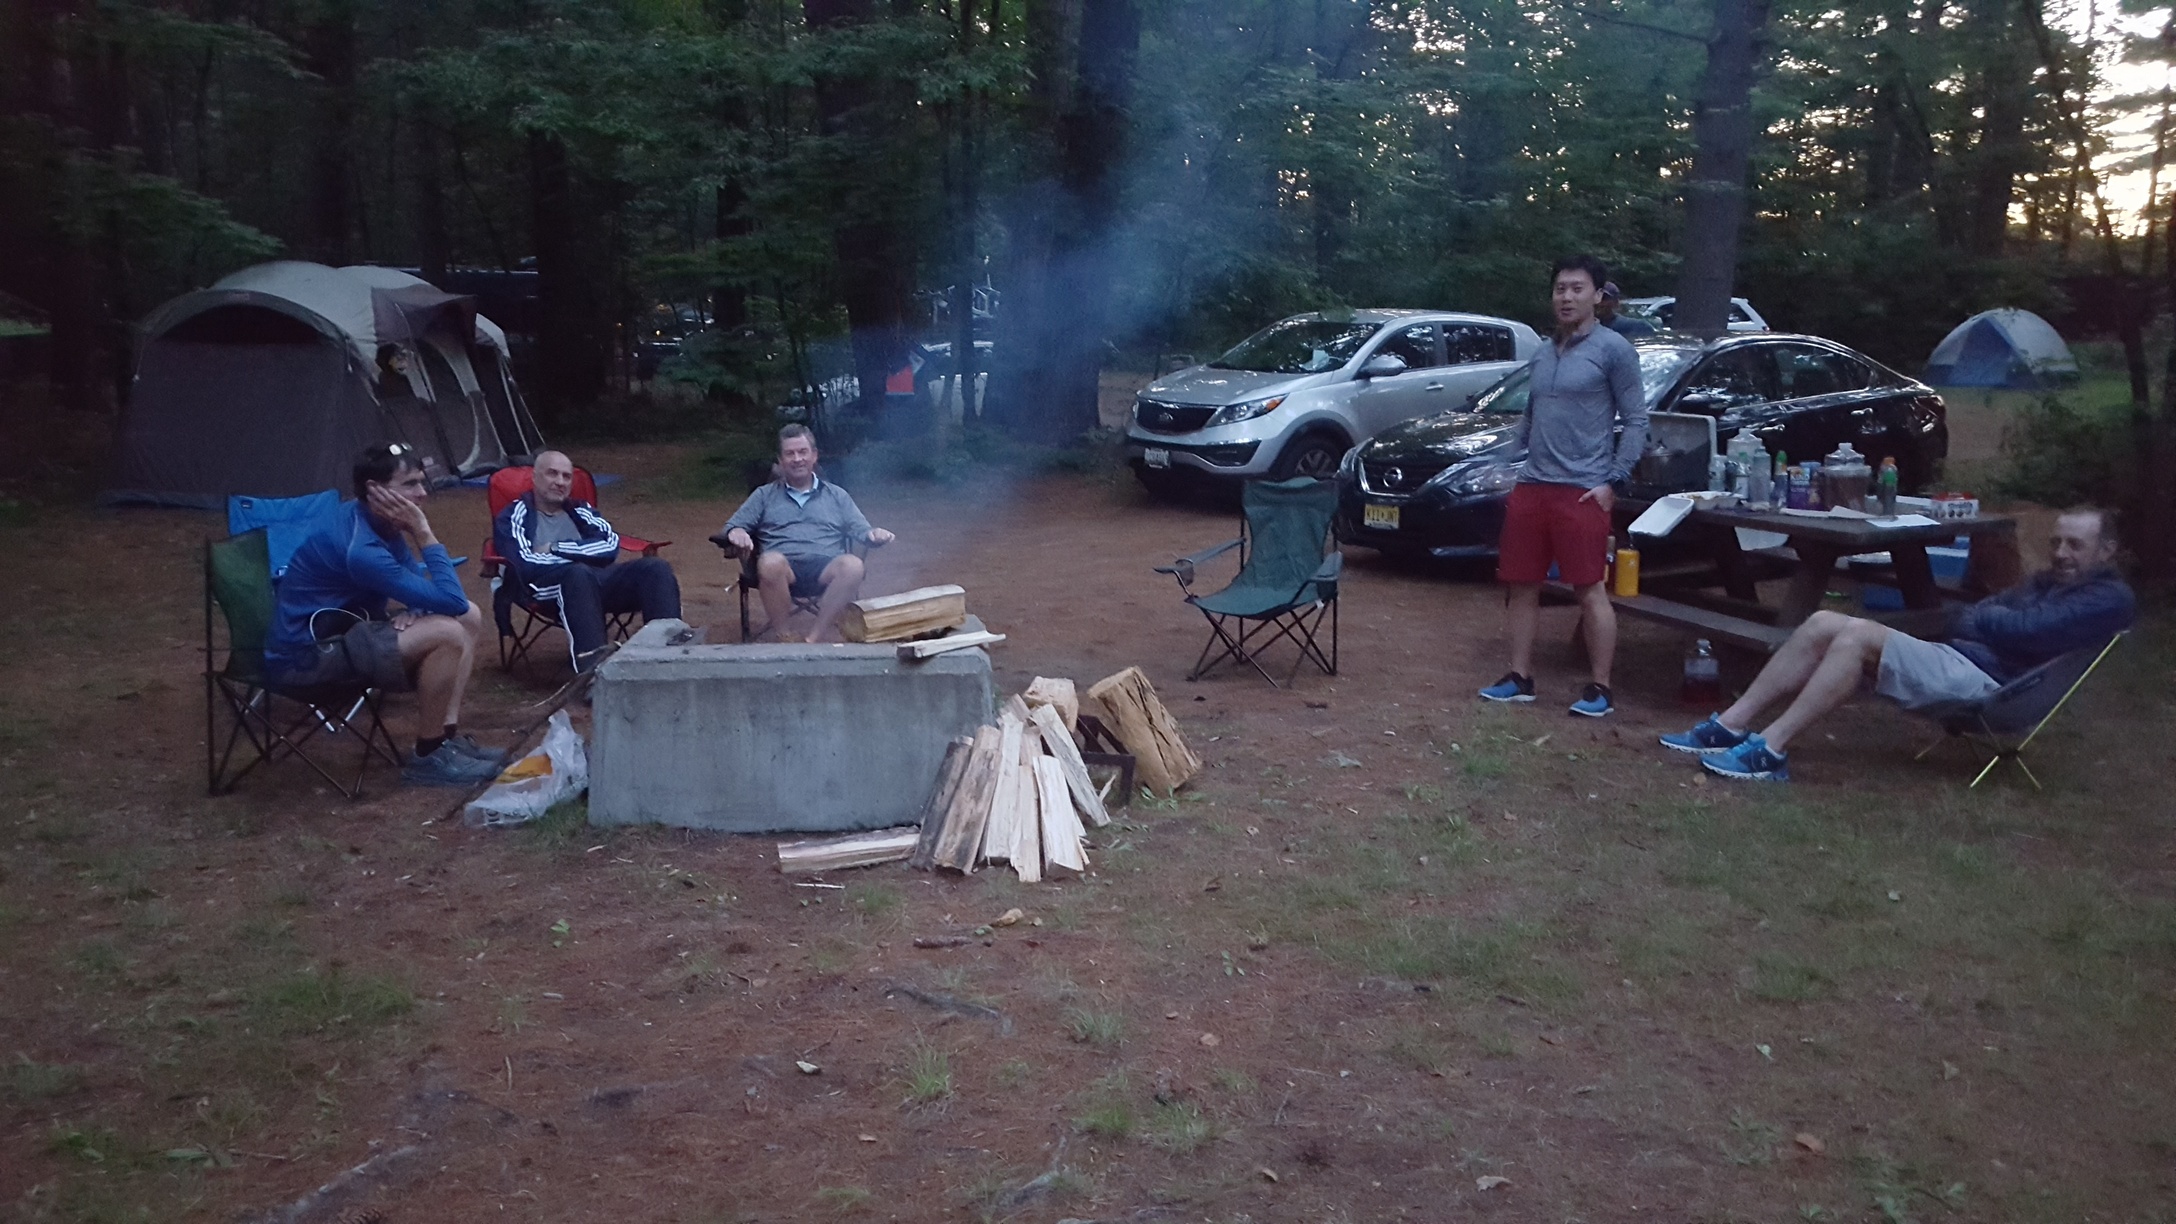 Camping in Meadowbrook Campground